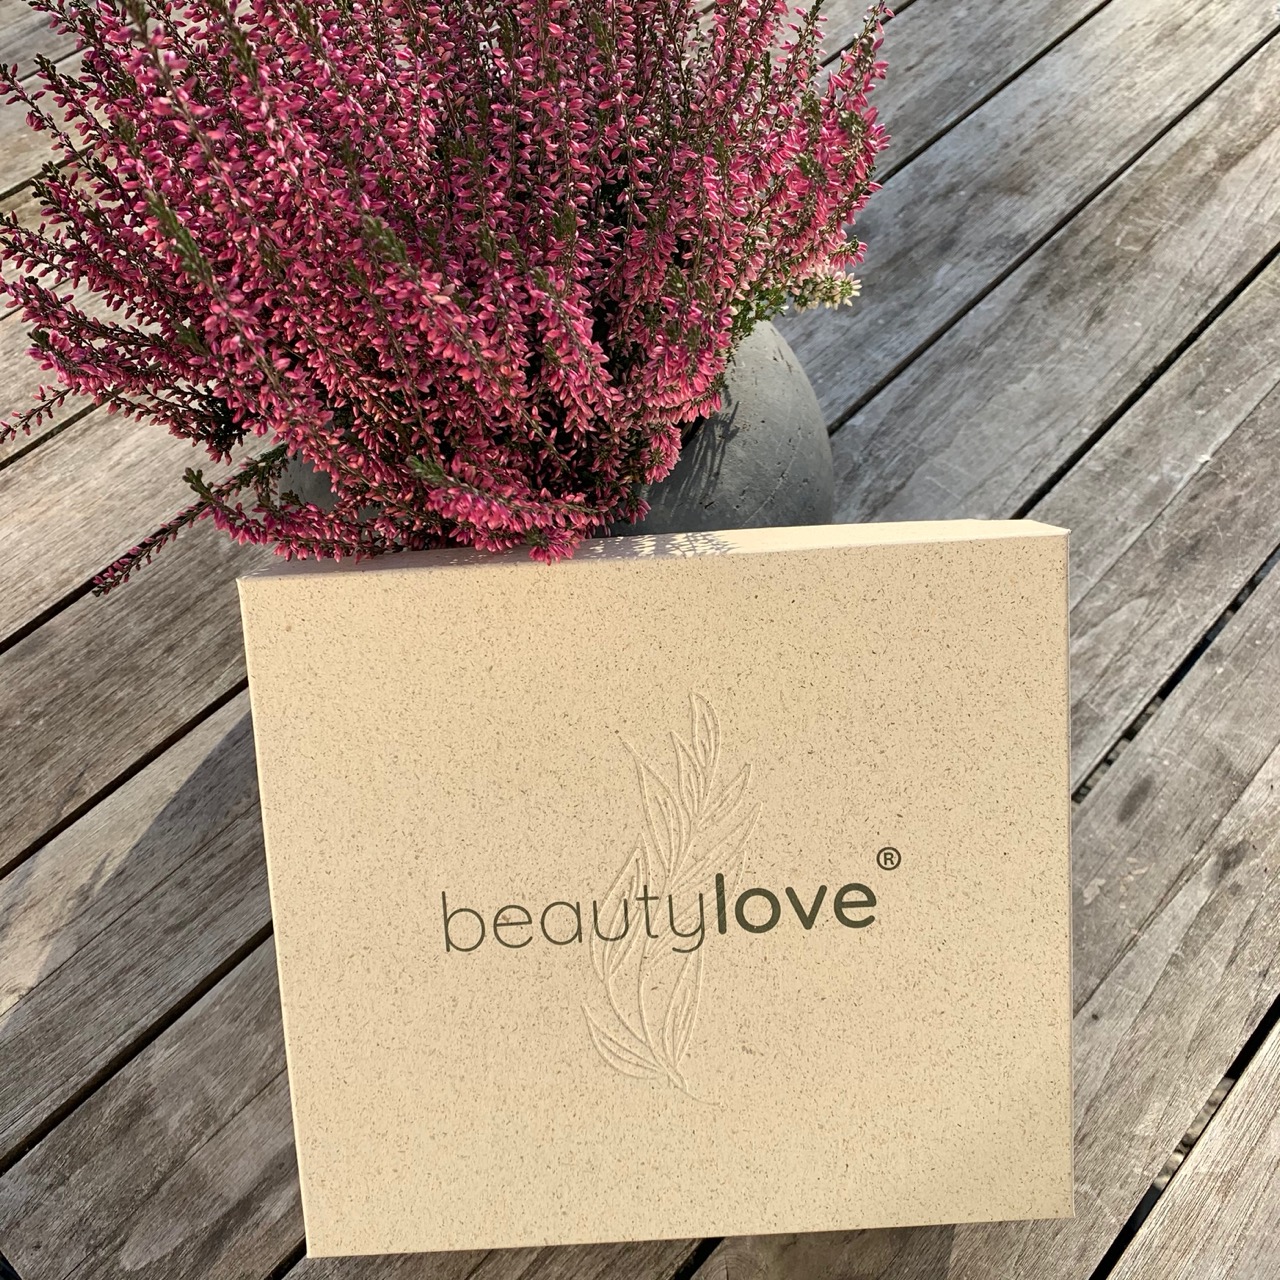 beautylove – The Natural Box: Air Tranquility